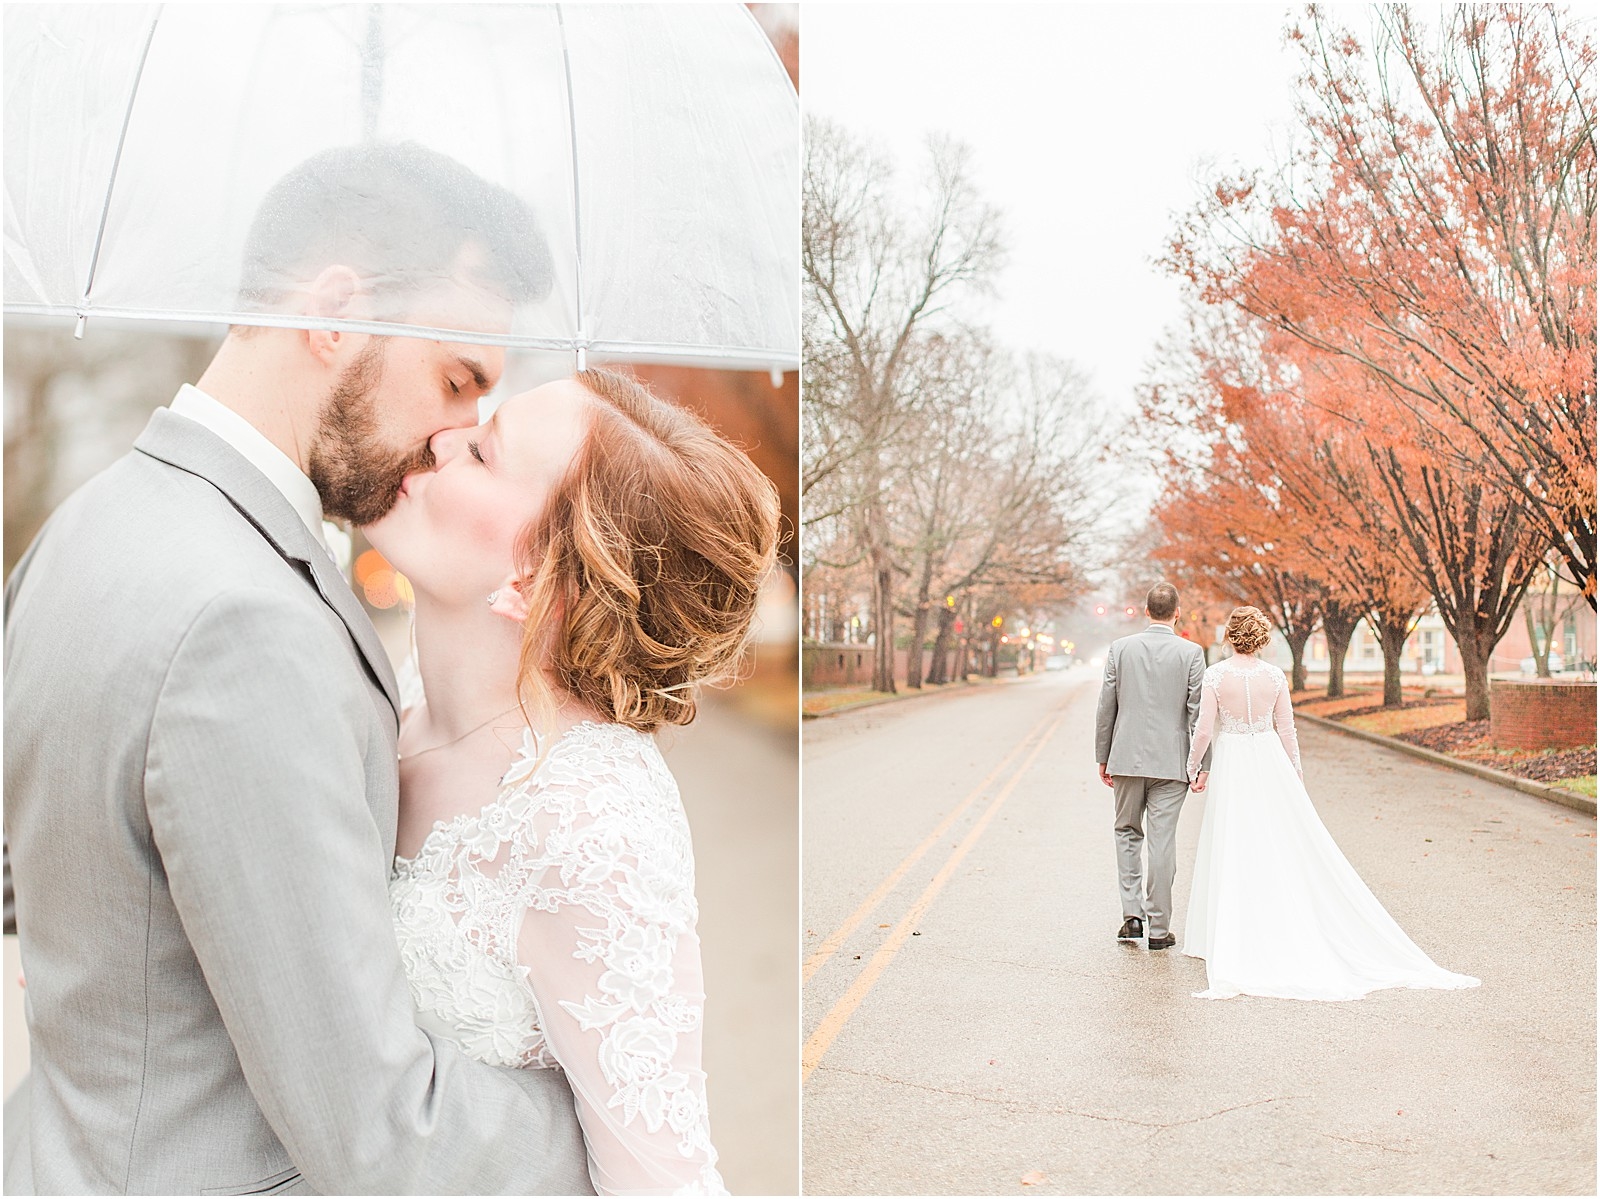 Amy and Logan | A Rainy New Harmony Indiana wedding | Bret and BRandie Photography | Bret and Brandie Photography | 0067.jpg